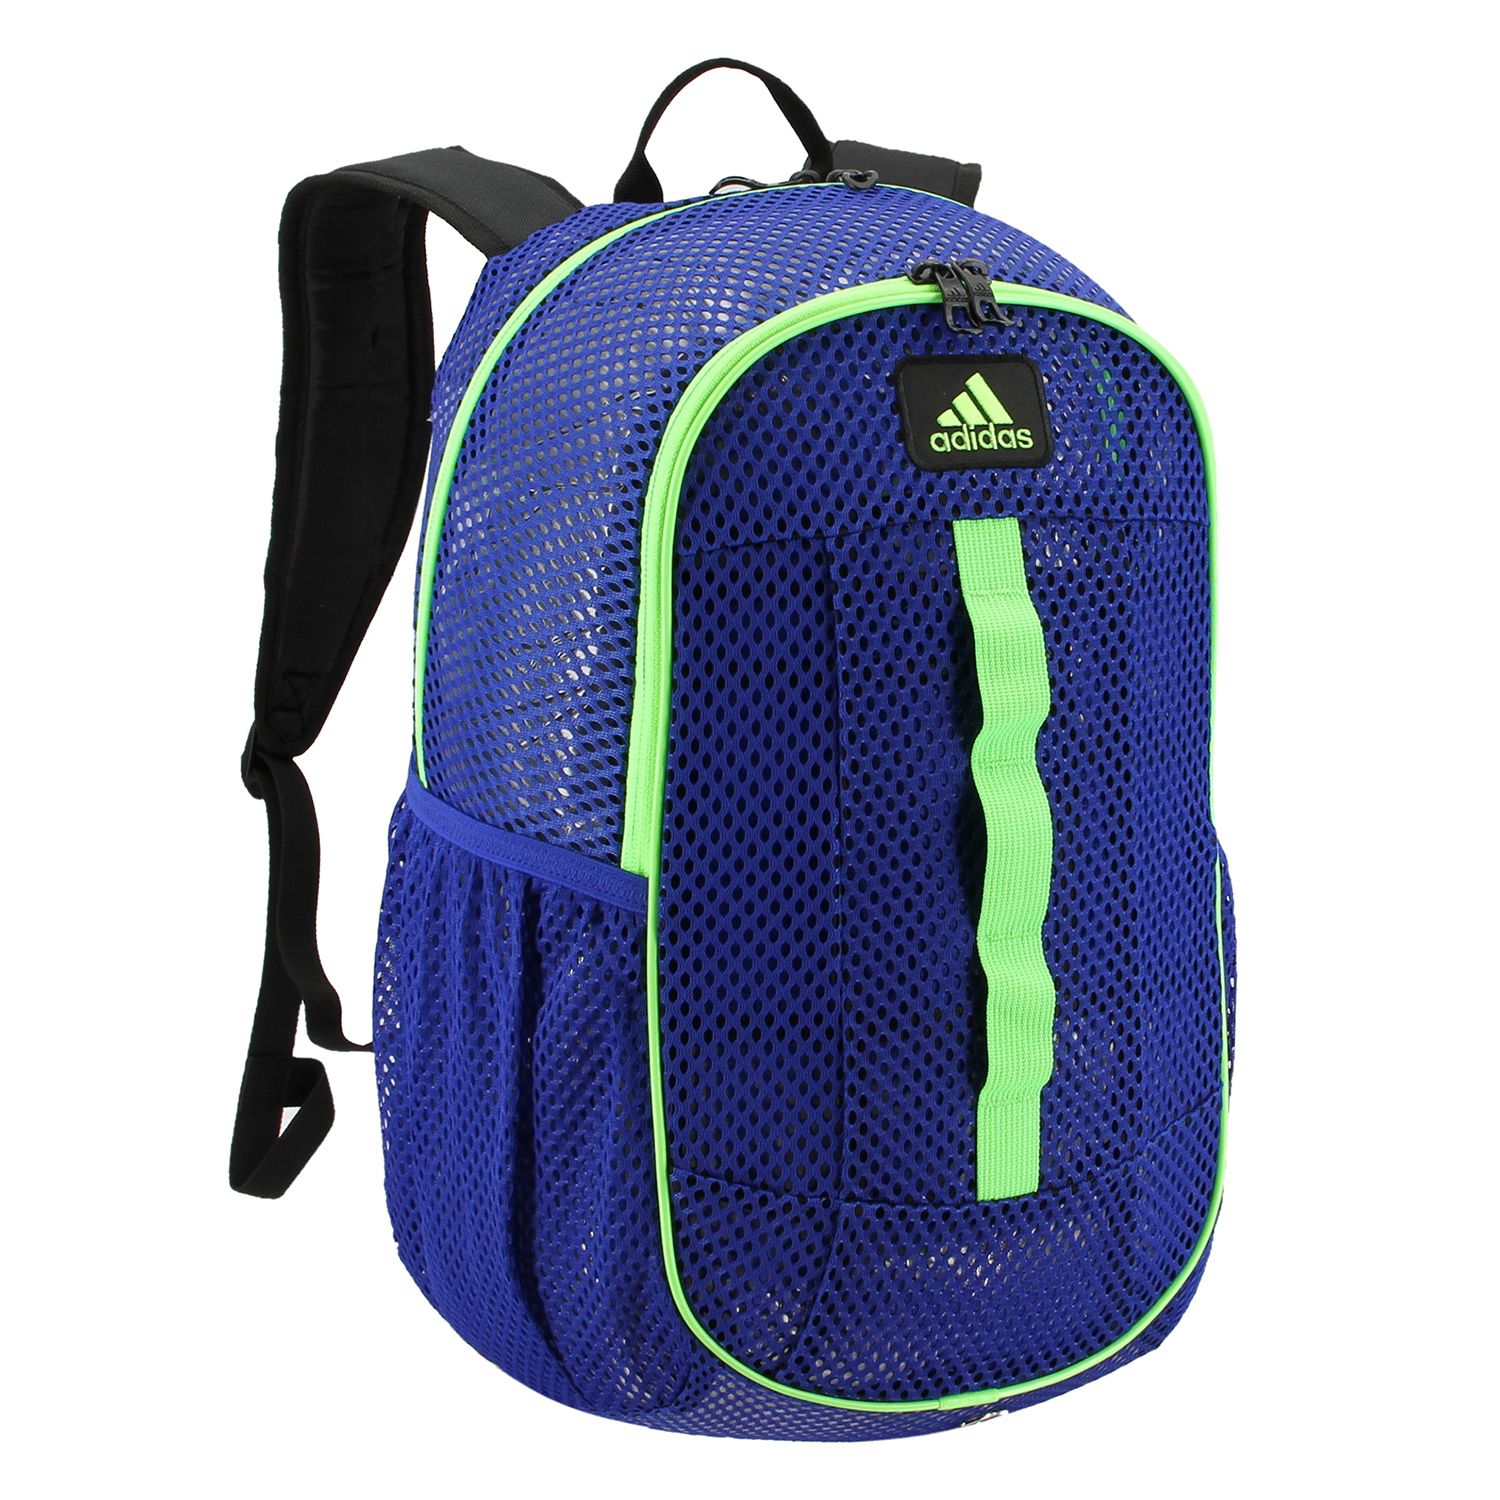 adidas one strap mesh backpack